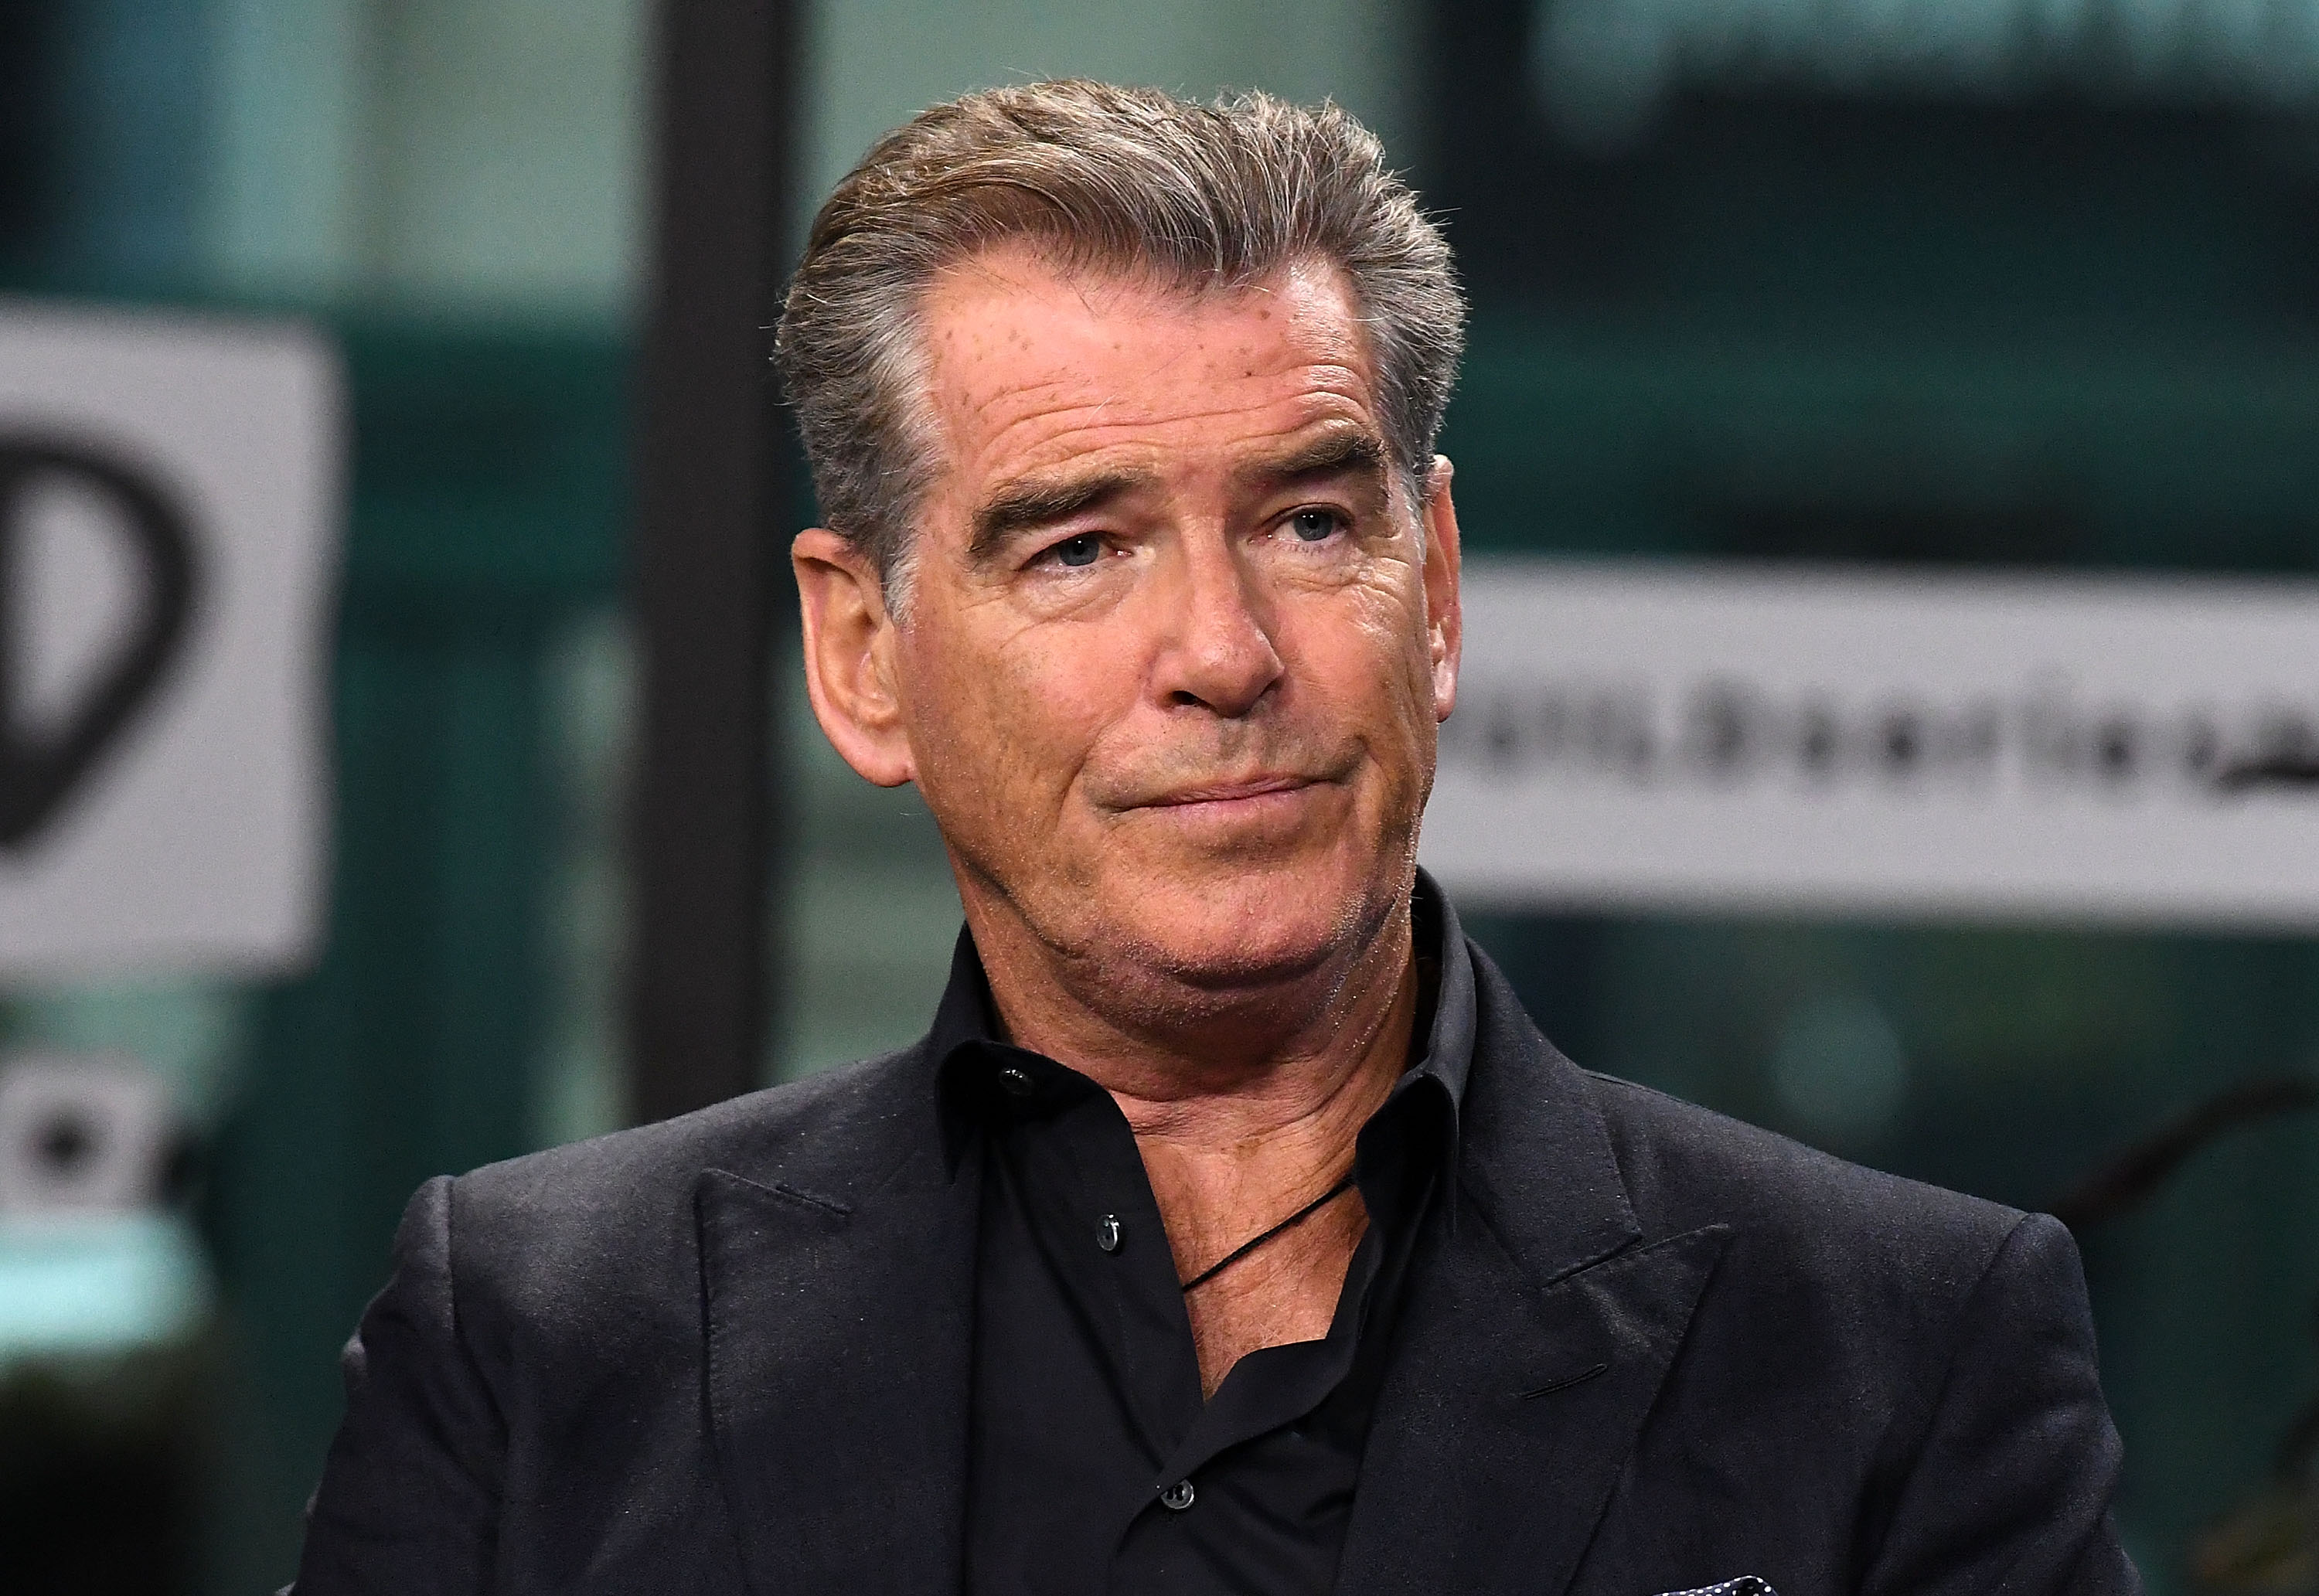 Pierce Brosnan discusses the new series "The Son" at Build Series at Build Studio on April 6, 2017. | Photo: GettyImages